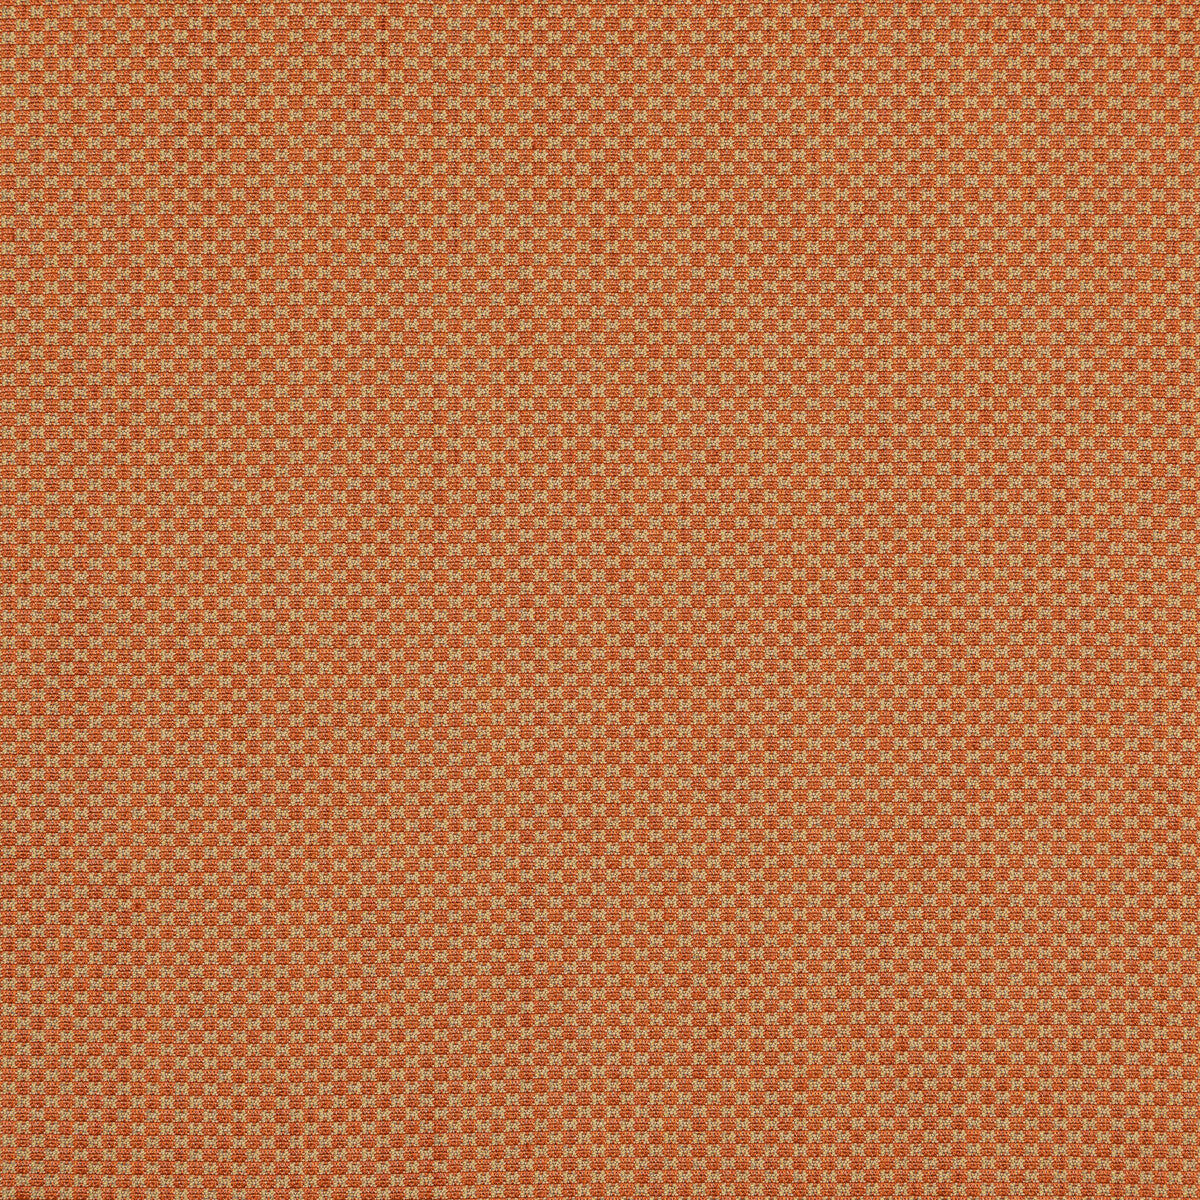 Devon fabric in tangerine color - pattern BFC-3685.12.0 - by Lee Jofa in the Blithfield collection